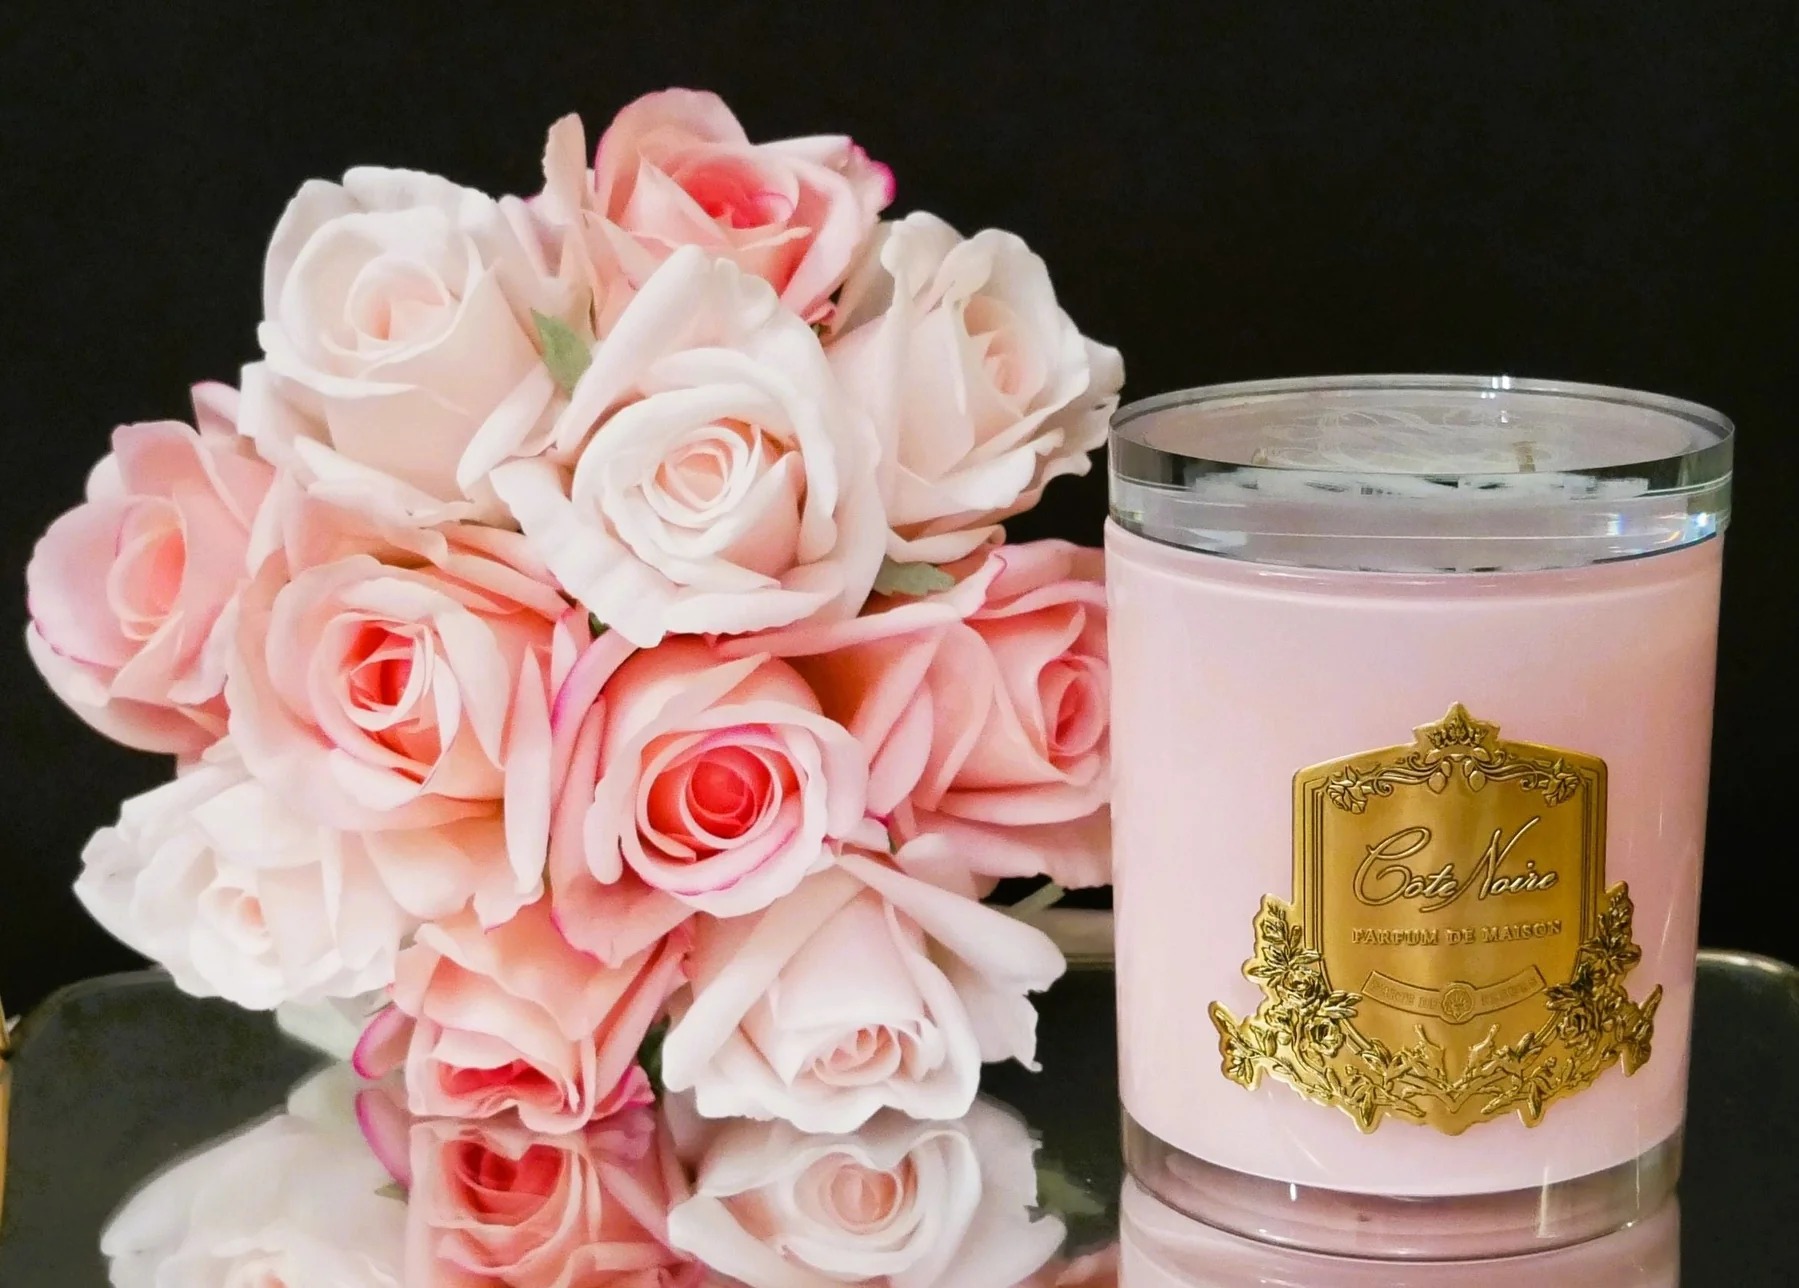 Cote Noire Pink Champagne 450g Soy Blend Candle